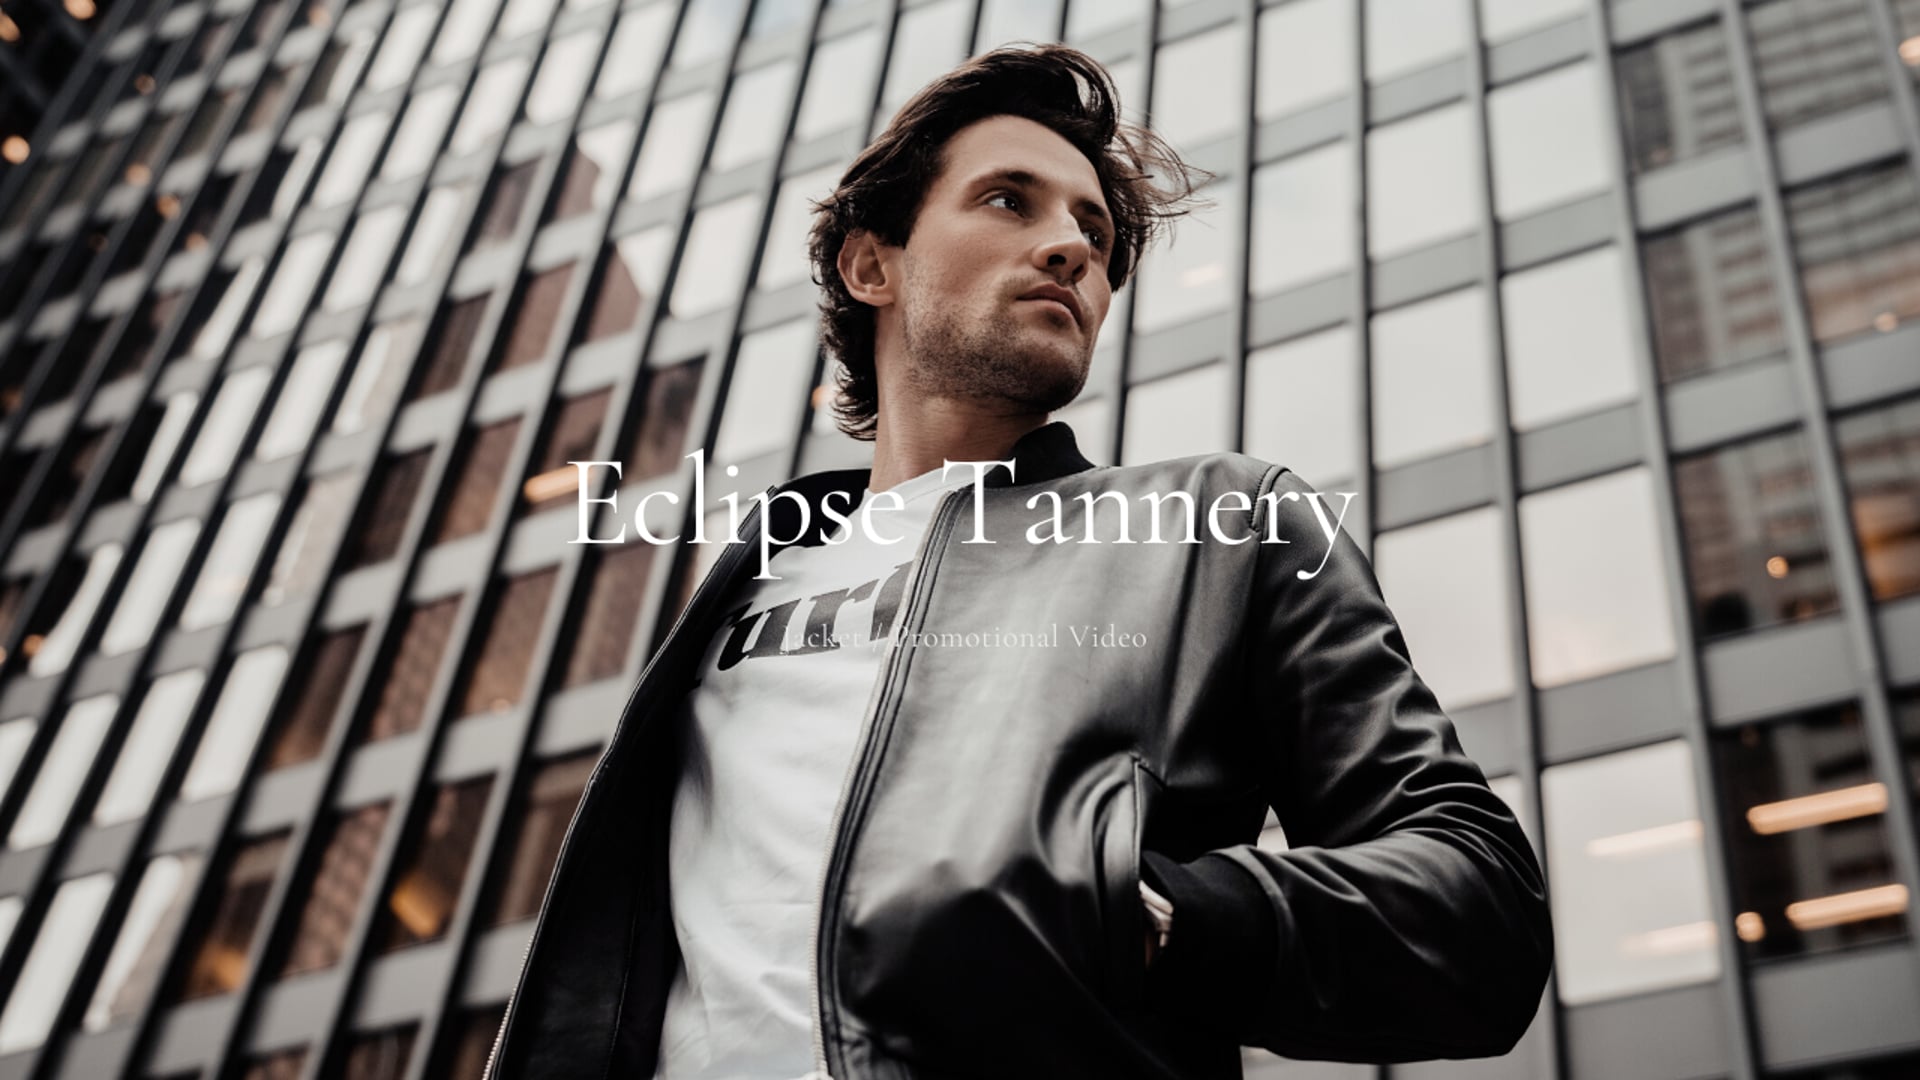 ECLIPSE TANNERY / Jacket / Promotional Video